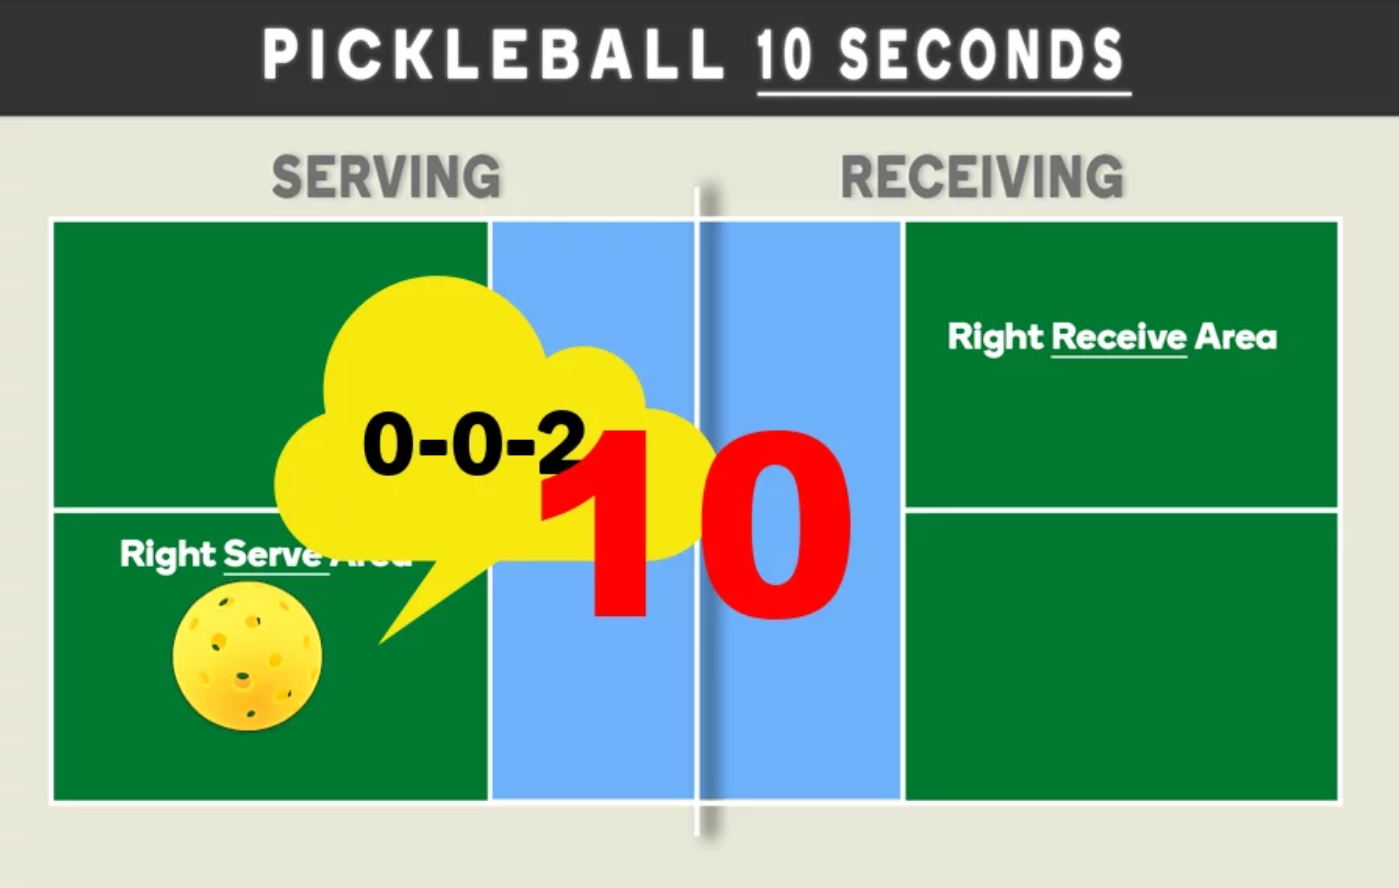 What is the ten-second service rule in pickleball?